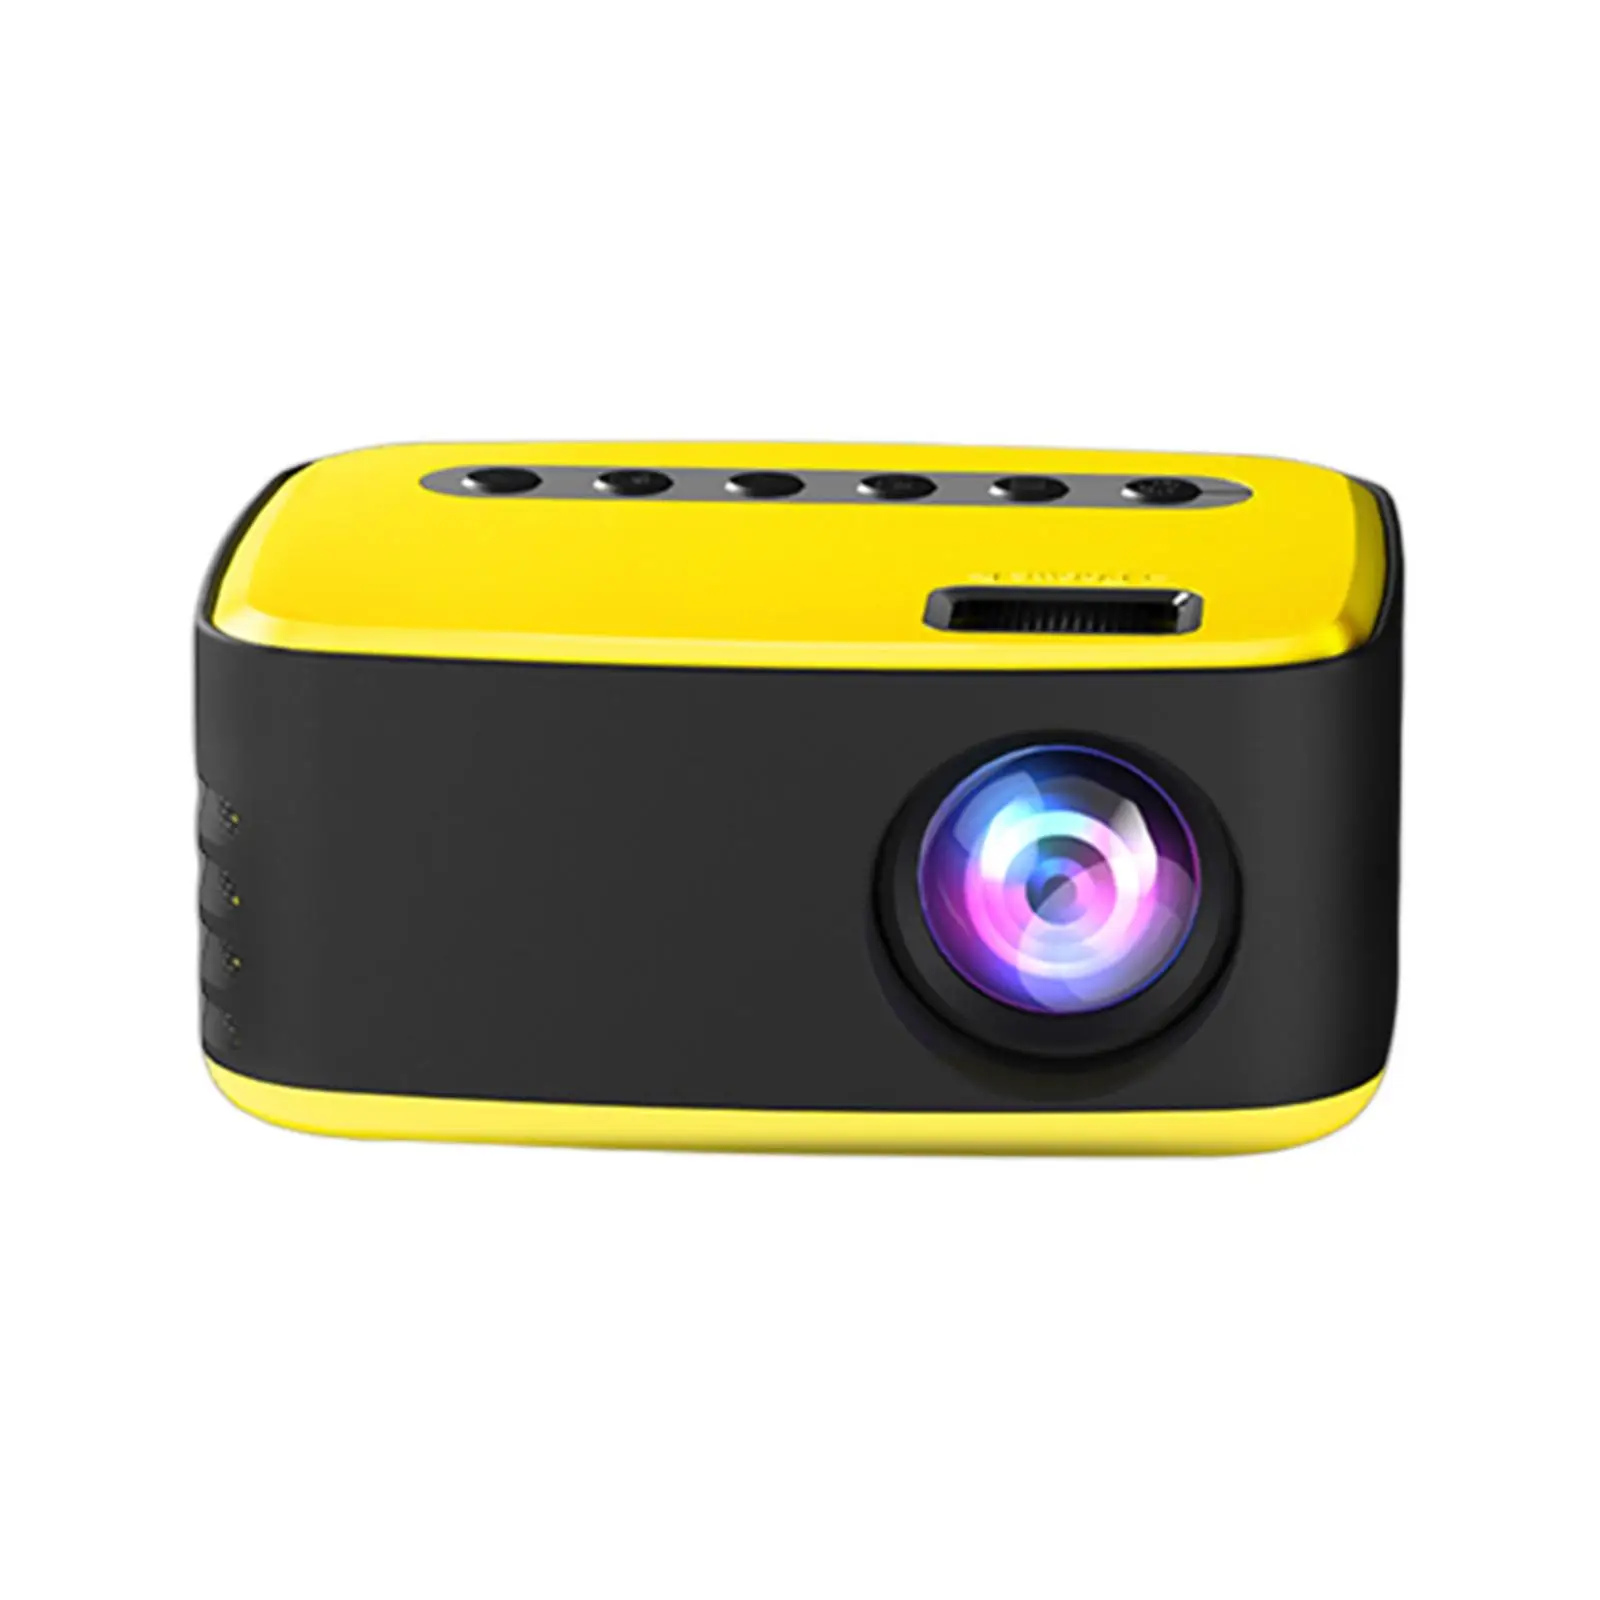 Projector USB 1080P Built in Speaker Smart Pocket Projector for Office Theater Watch Anywhere Inside Outside Bedroom Home Cinema